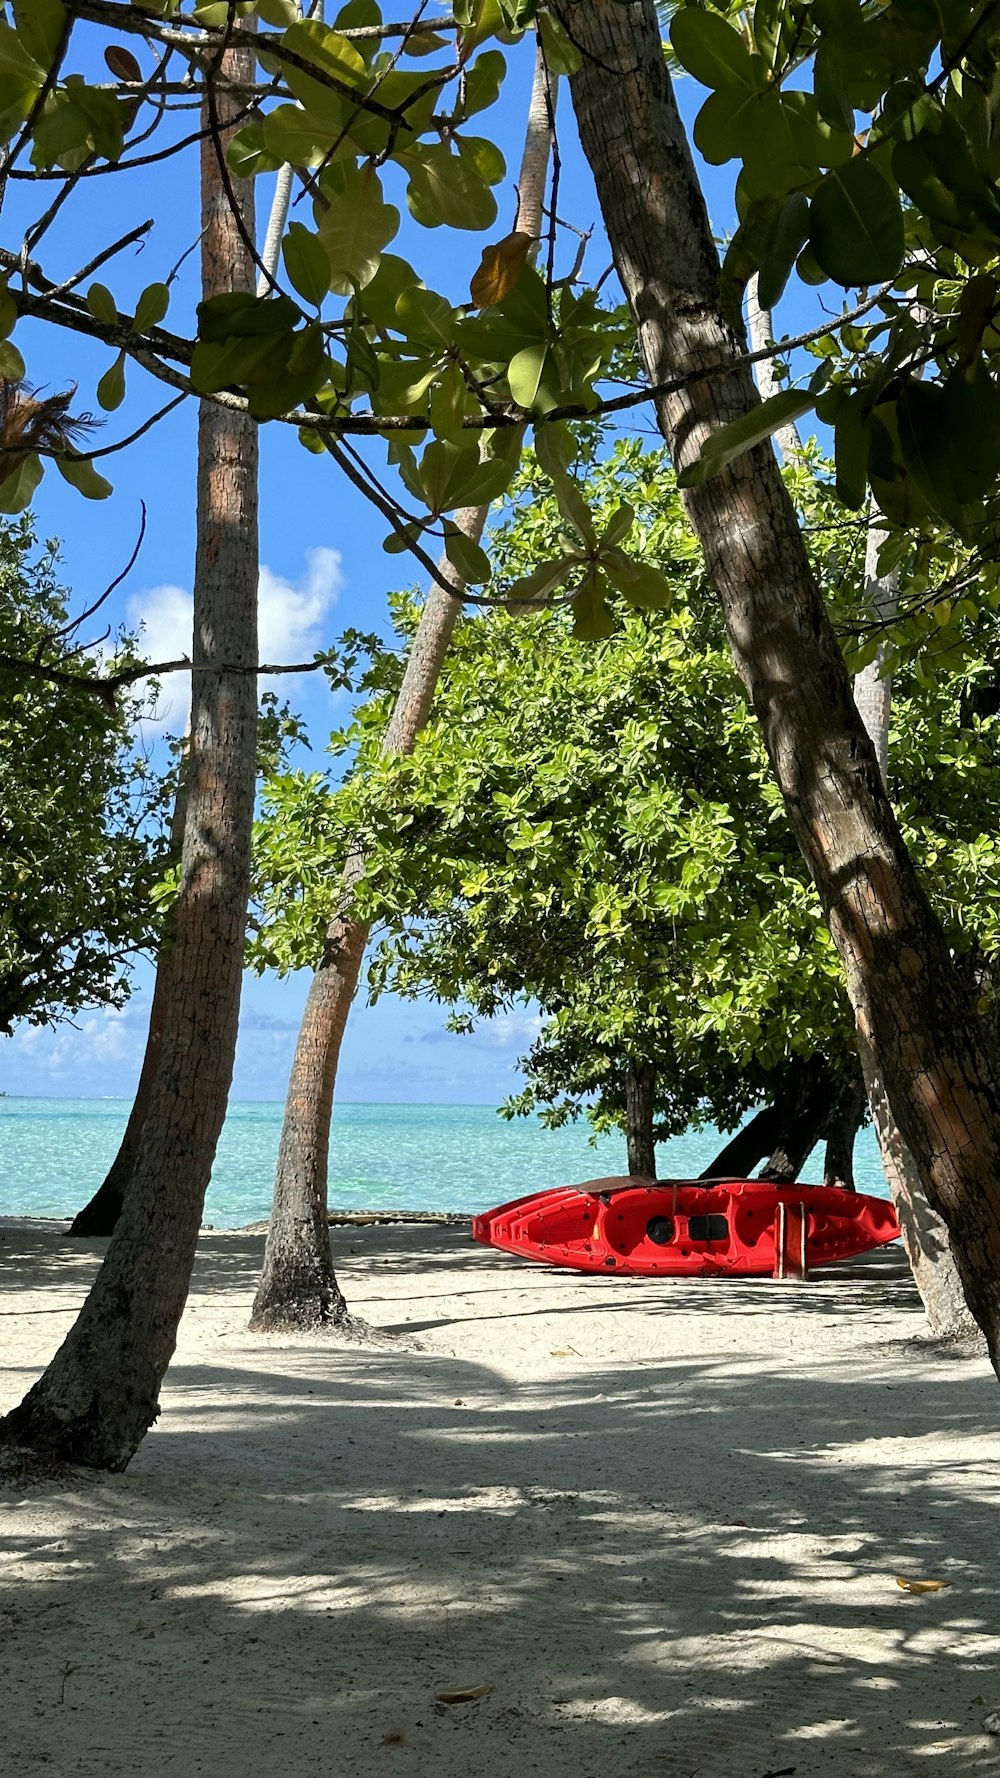 a beach with trees and a red boat in the water